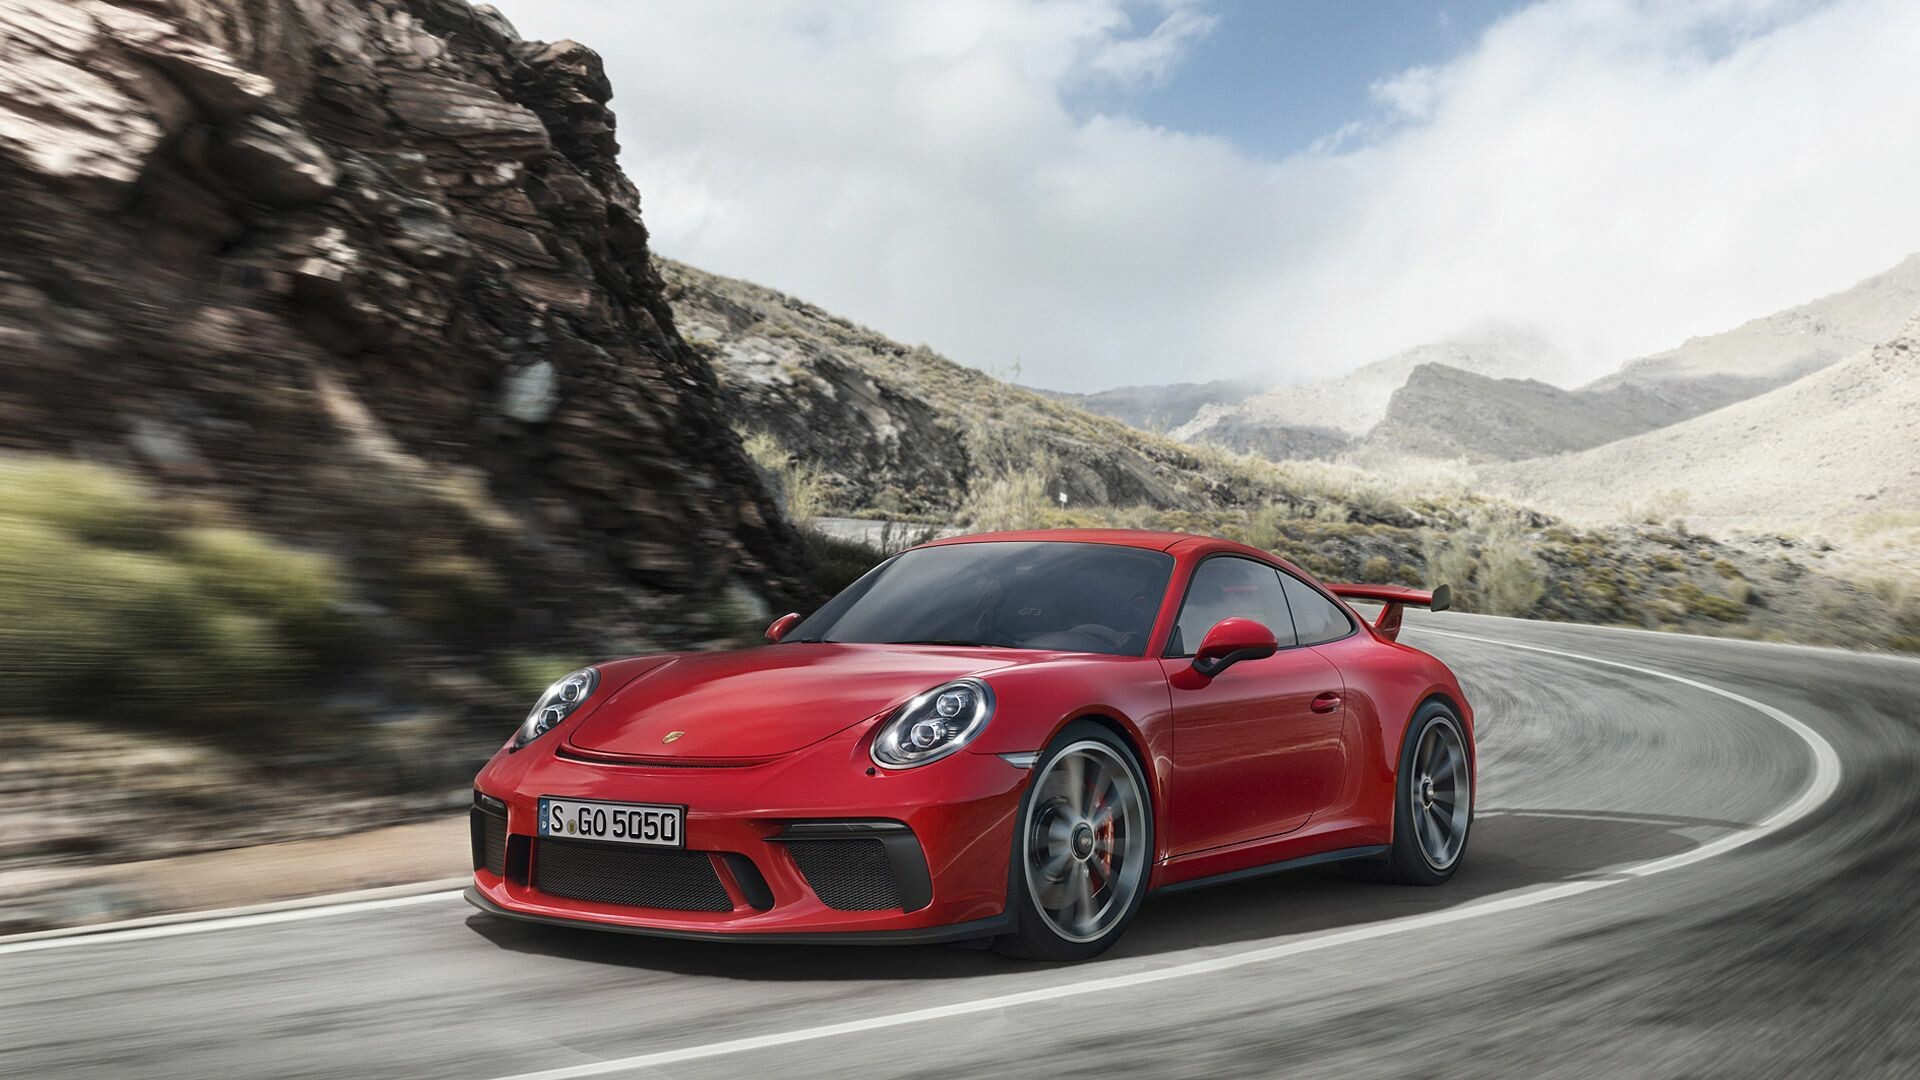 Porsche 911: The third generation of the 997 GT3 RS was announced in April 2011. 1920x1080 Full HD Background.